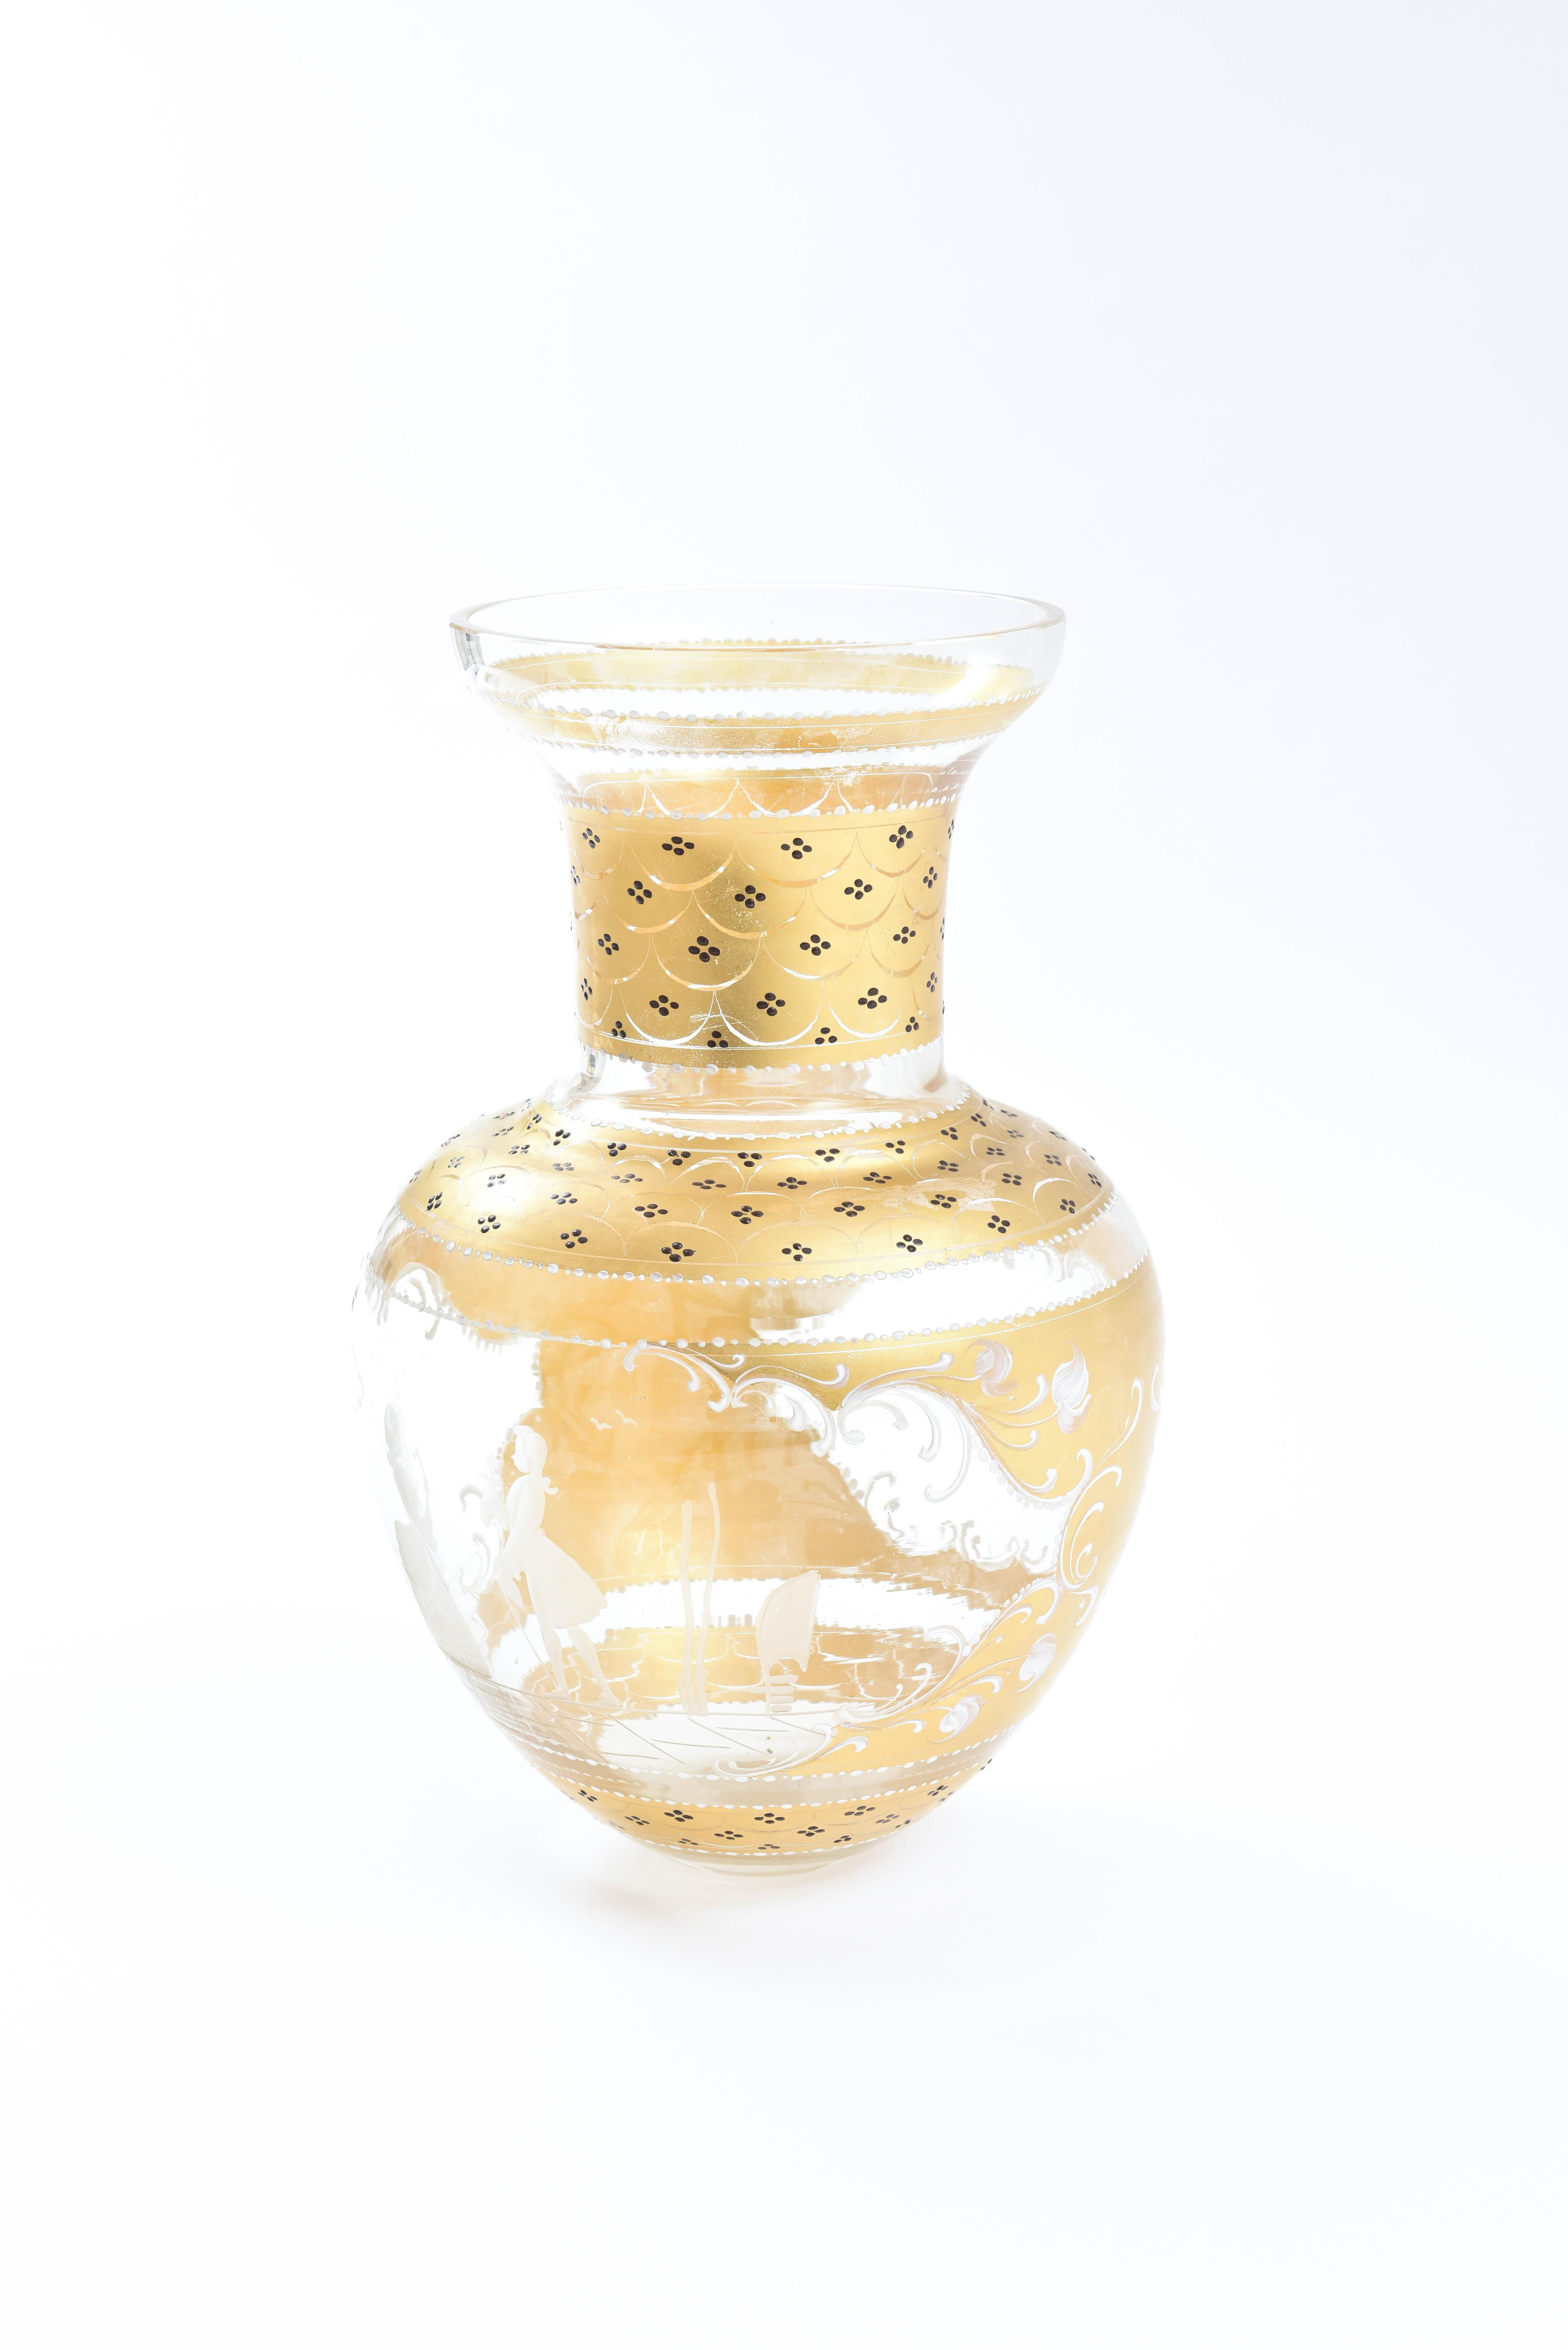 This vase also features beautiful 24-karat gold decoration throughout and two different hand etched scenes. One is a traditional 18th century courting couple and the other panel has a delightful village vista. Please note the extra tall size and